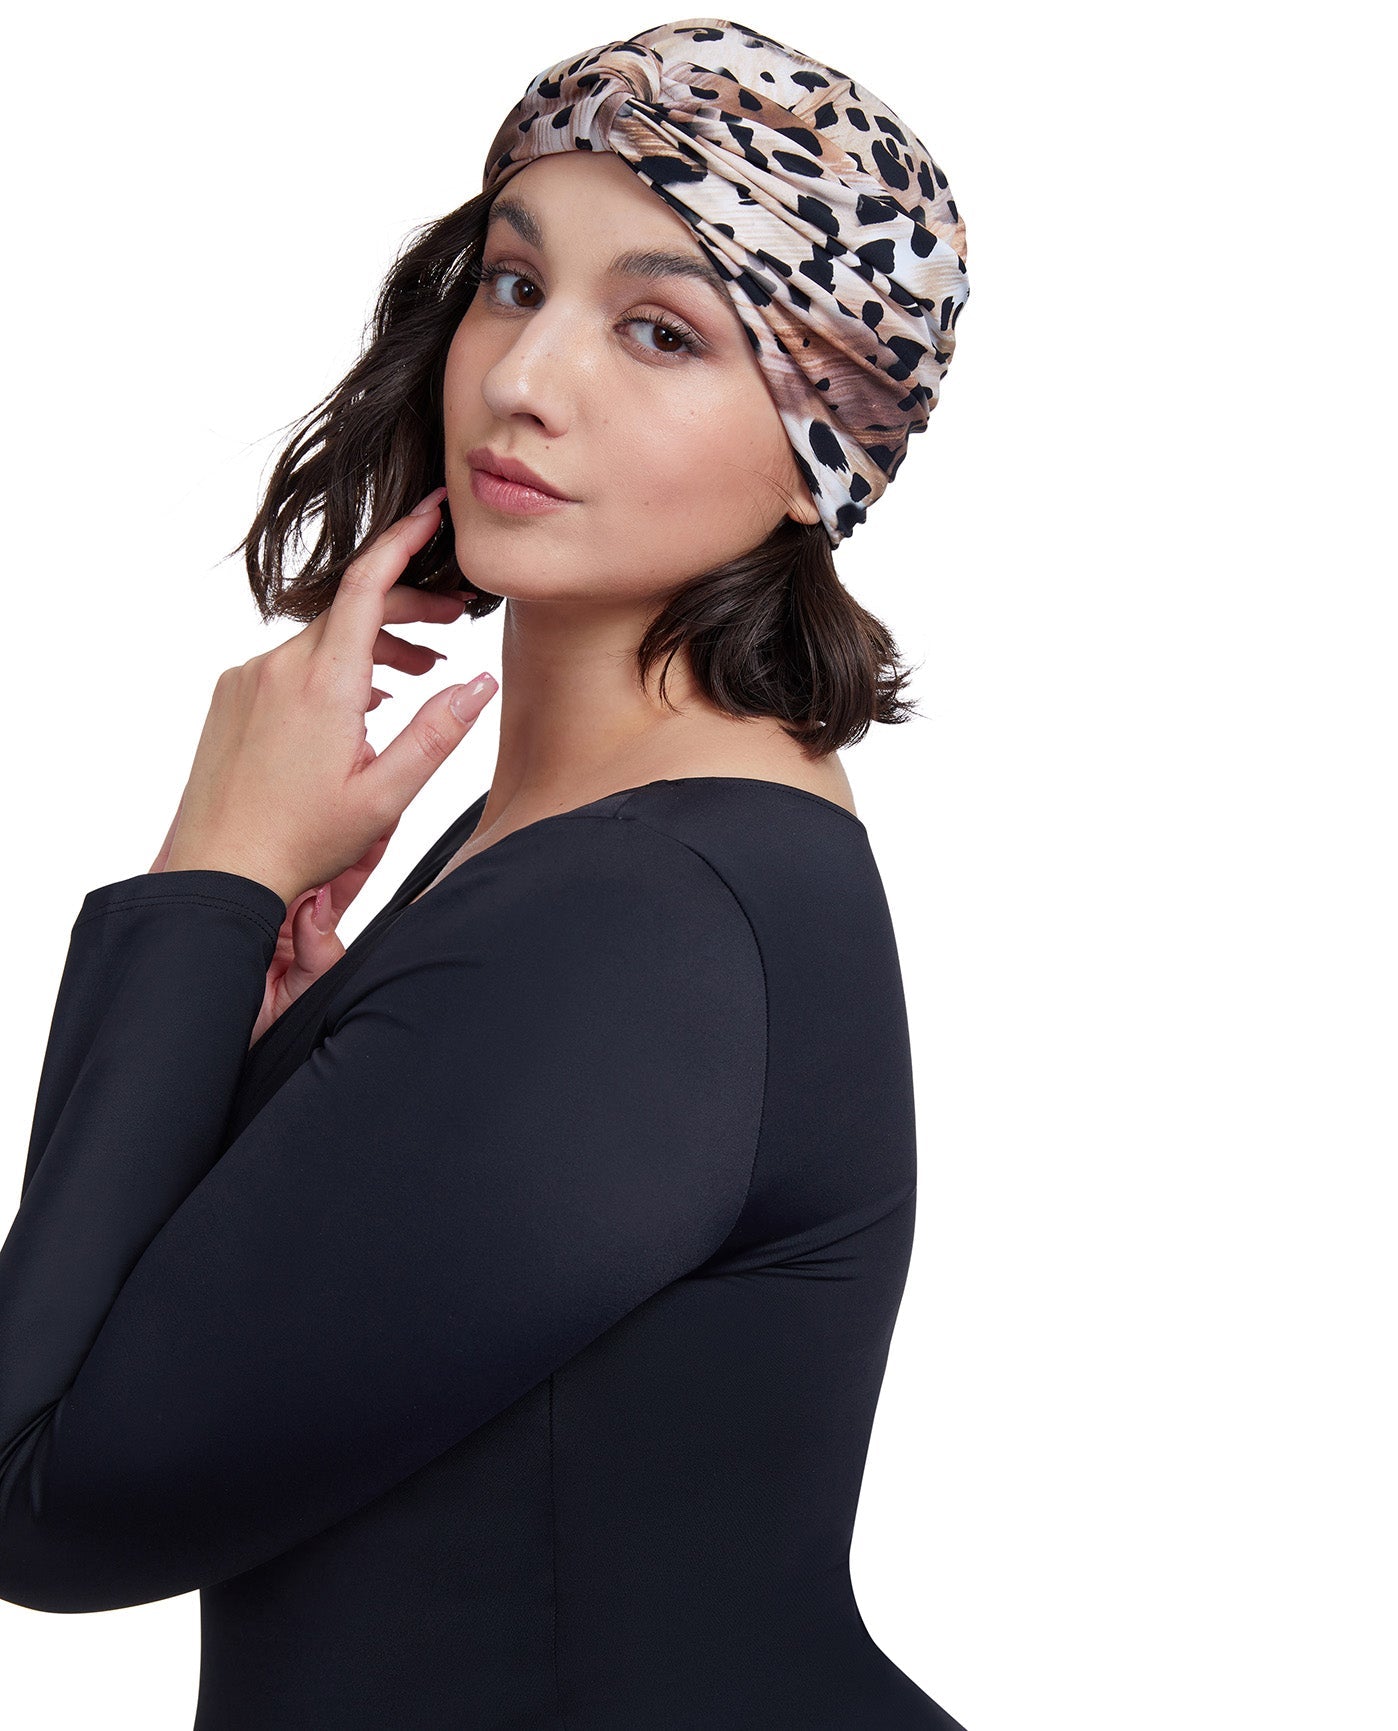 Front View Of Gottex Modest Knotted Hair Covering | GOTTEX MODEST LEOPARD